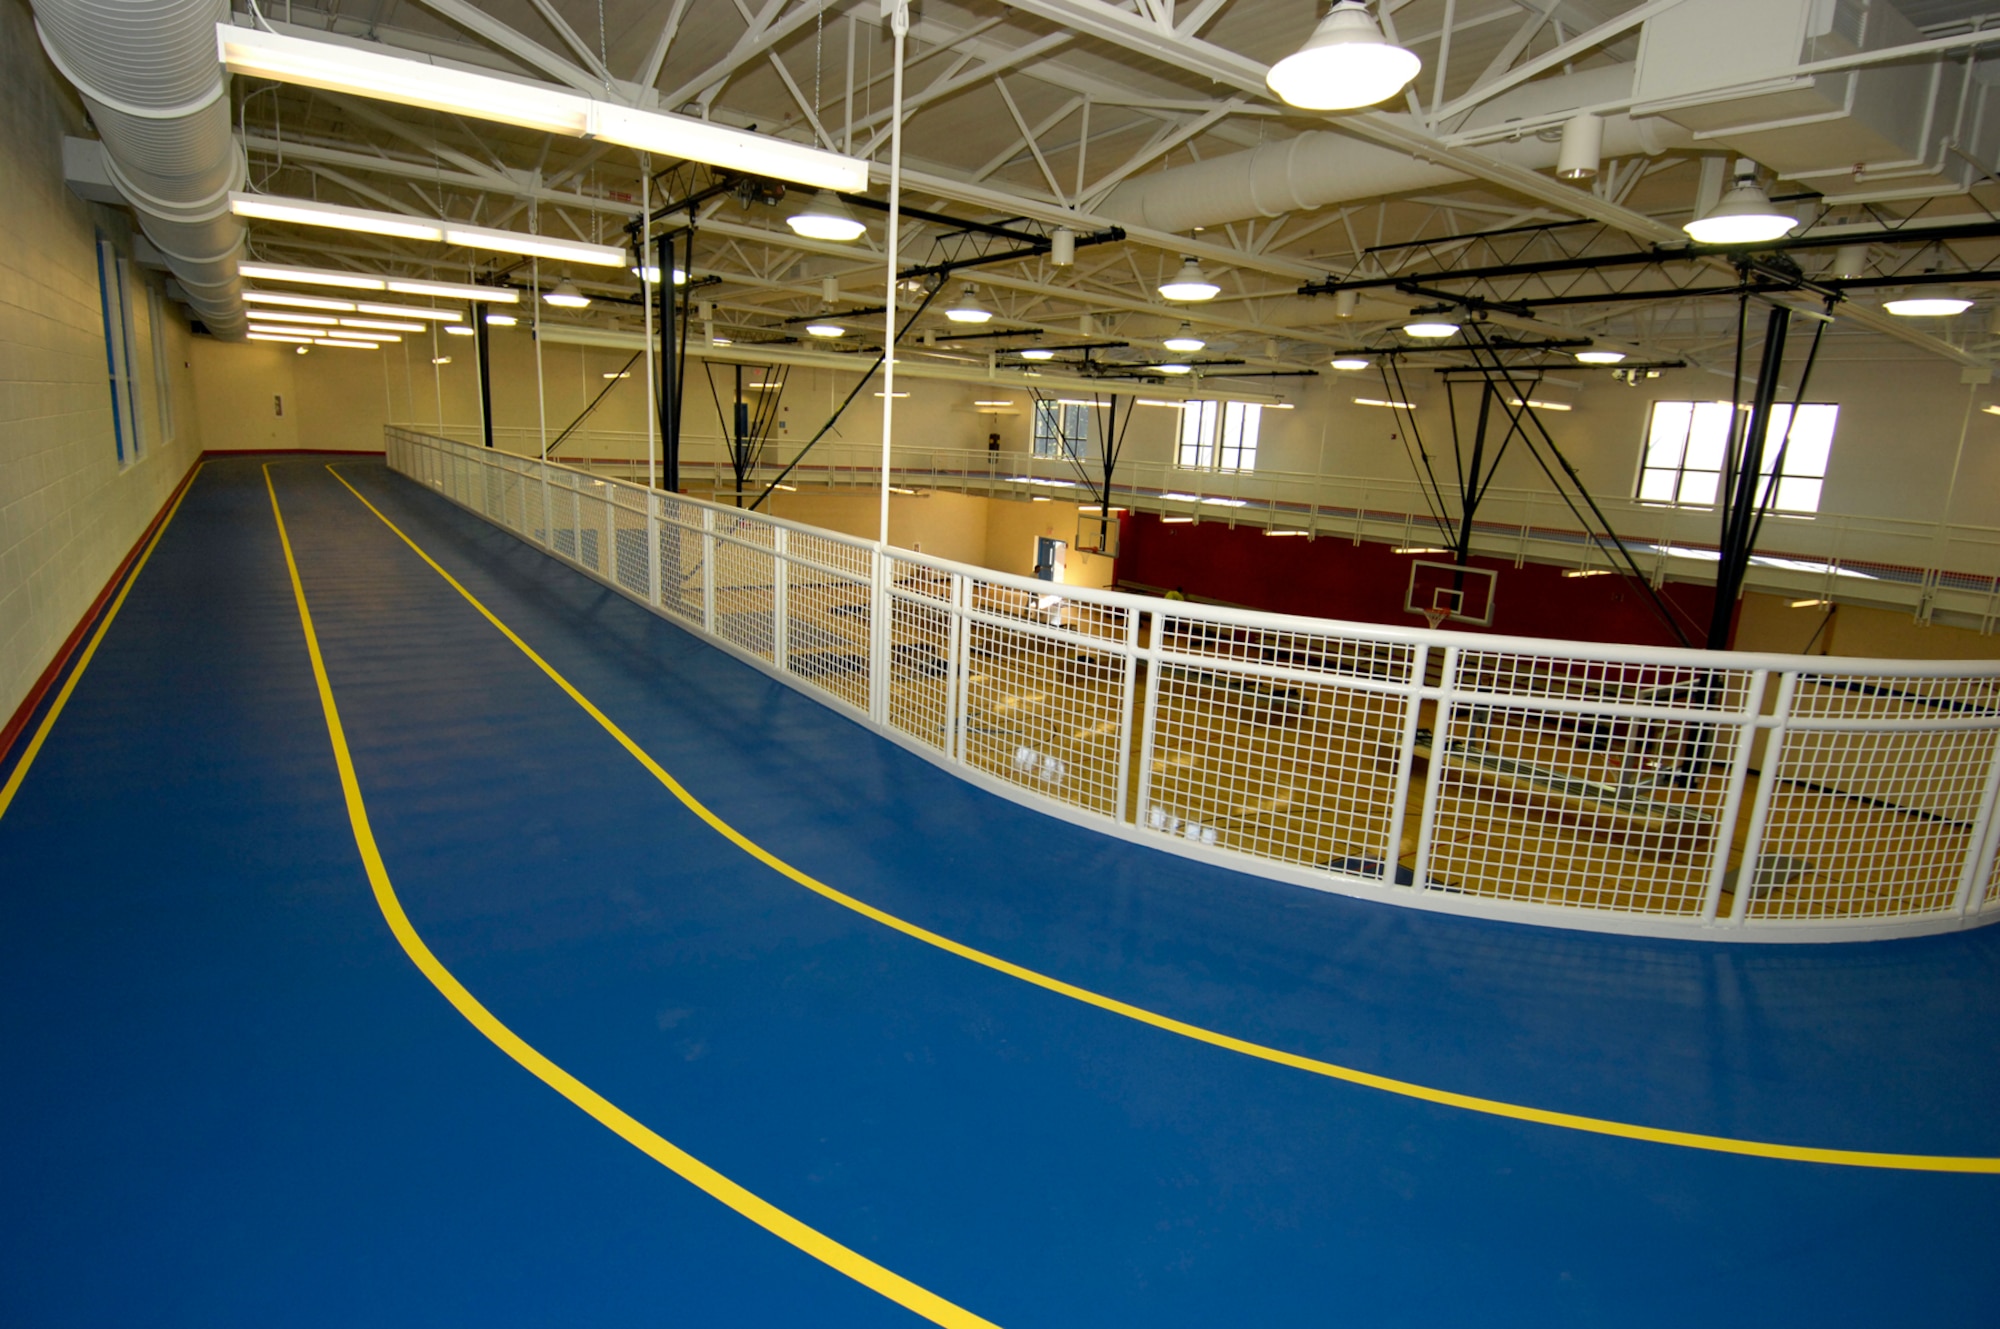 Hanscom Air Force Base, Mass. -- The new Fitness and Sports Center has an indoor running track located above the multipurpose gymnasium, which has an NCAA-sized basketball court. (U.S. Air Force photo by Mark Wyatt)